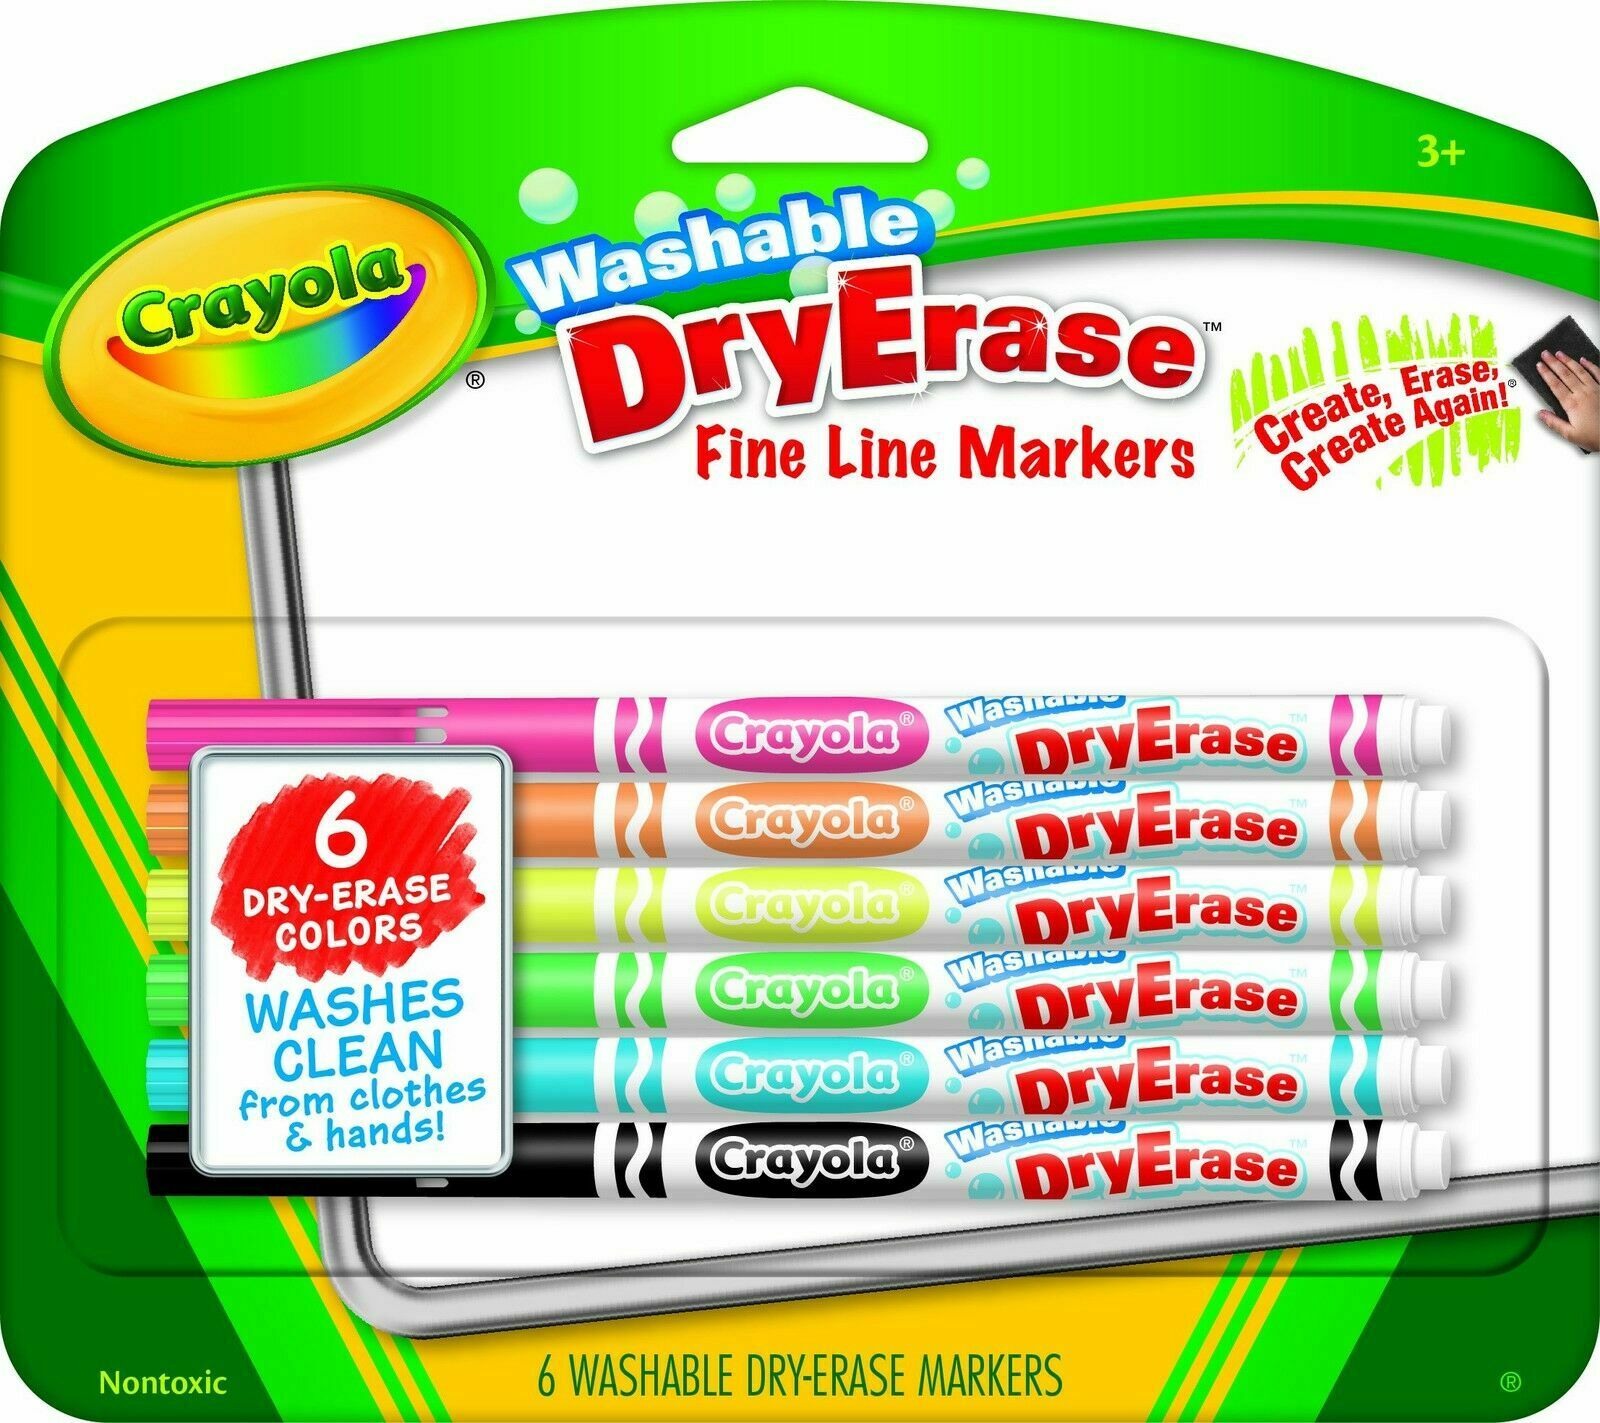 Crayola Washable Dry-erase Fine Line Markers,6 Classic Colors Non-toxic Arttools